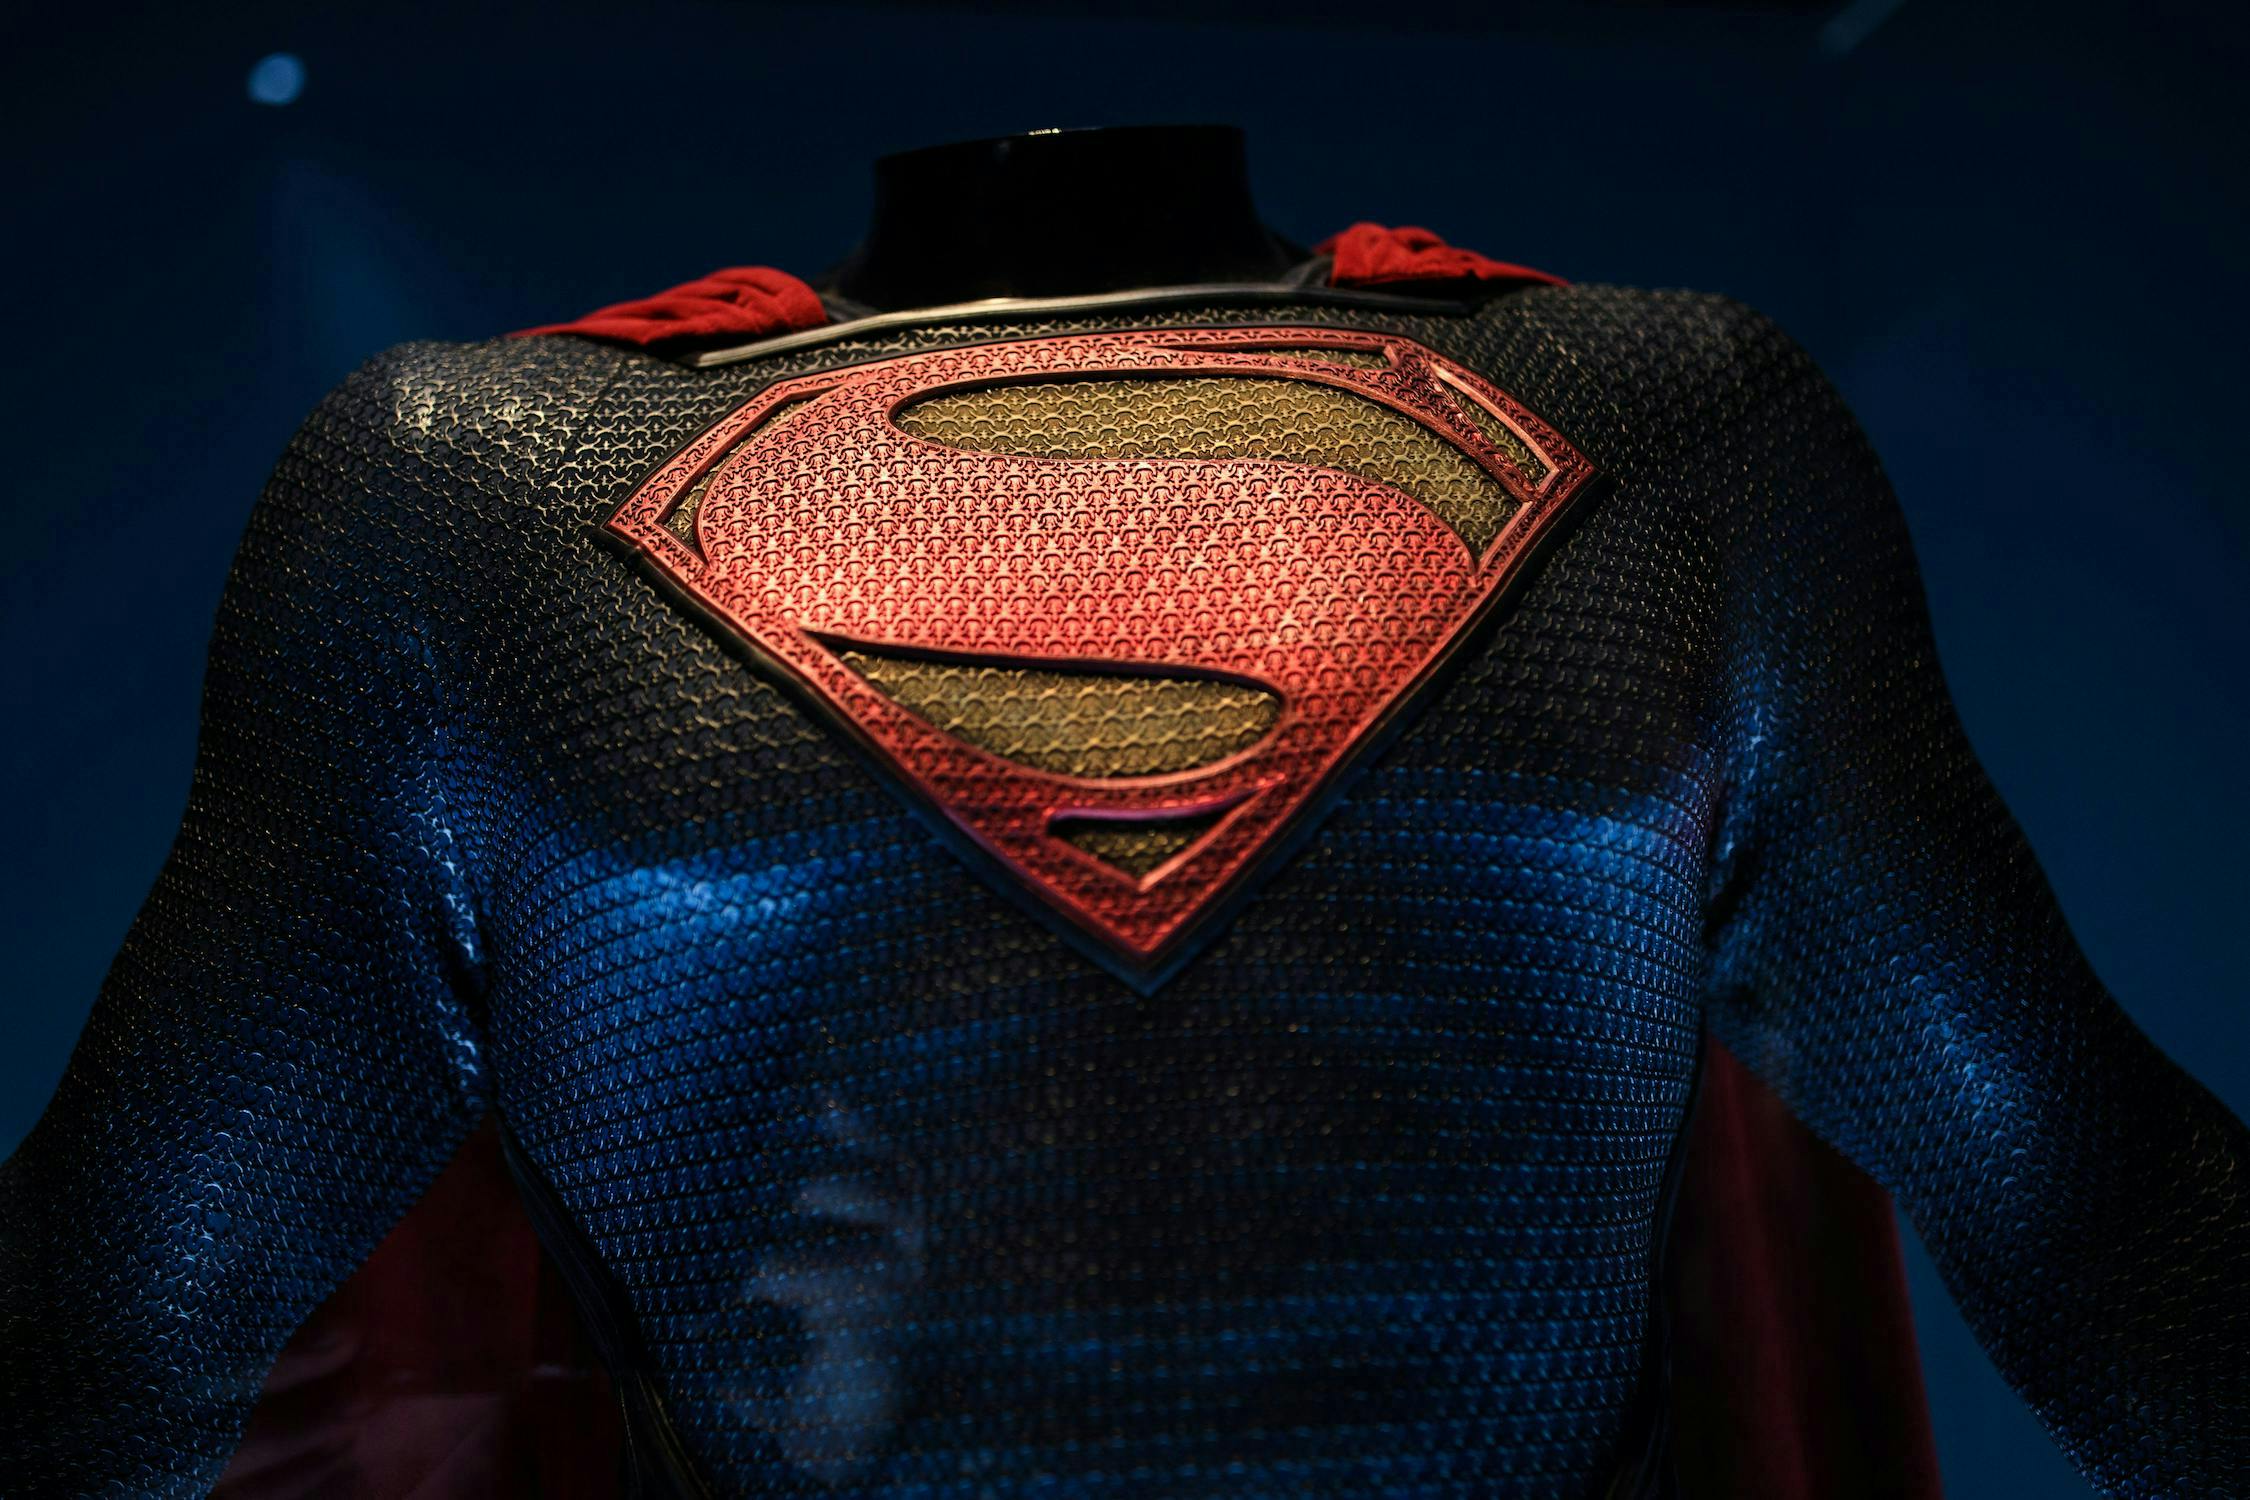 A Superman costume from the 2013 Man of Steel film.